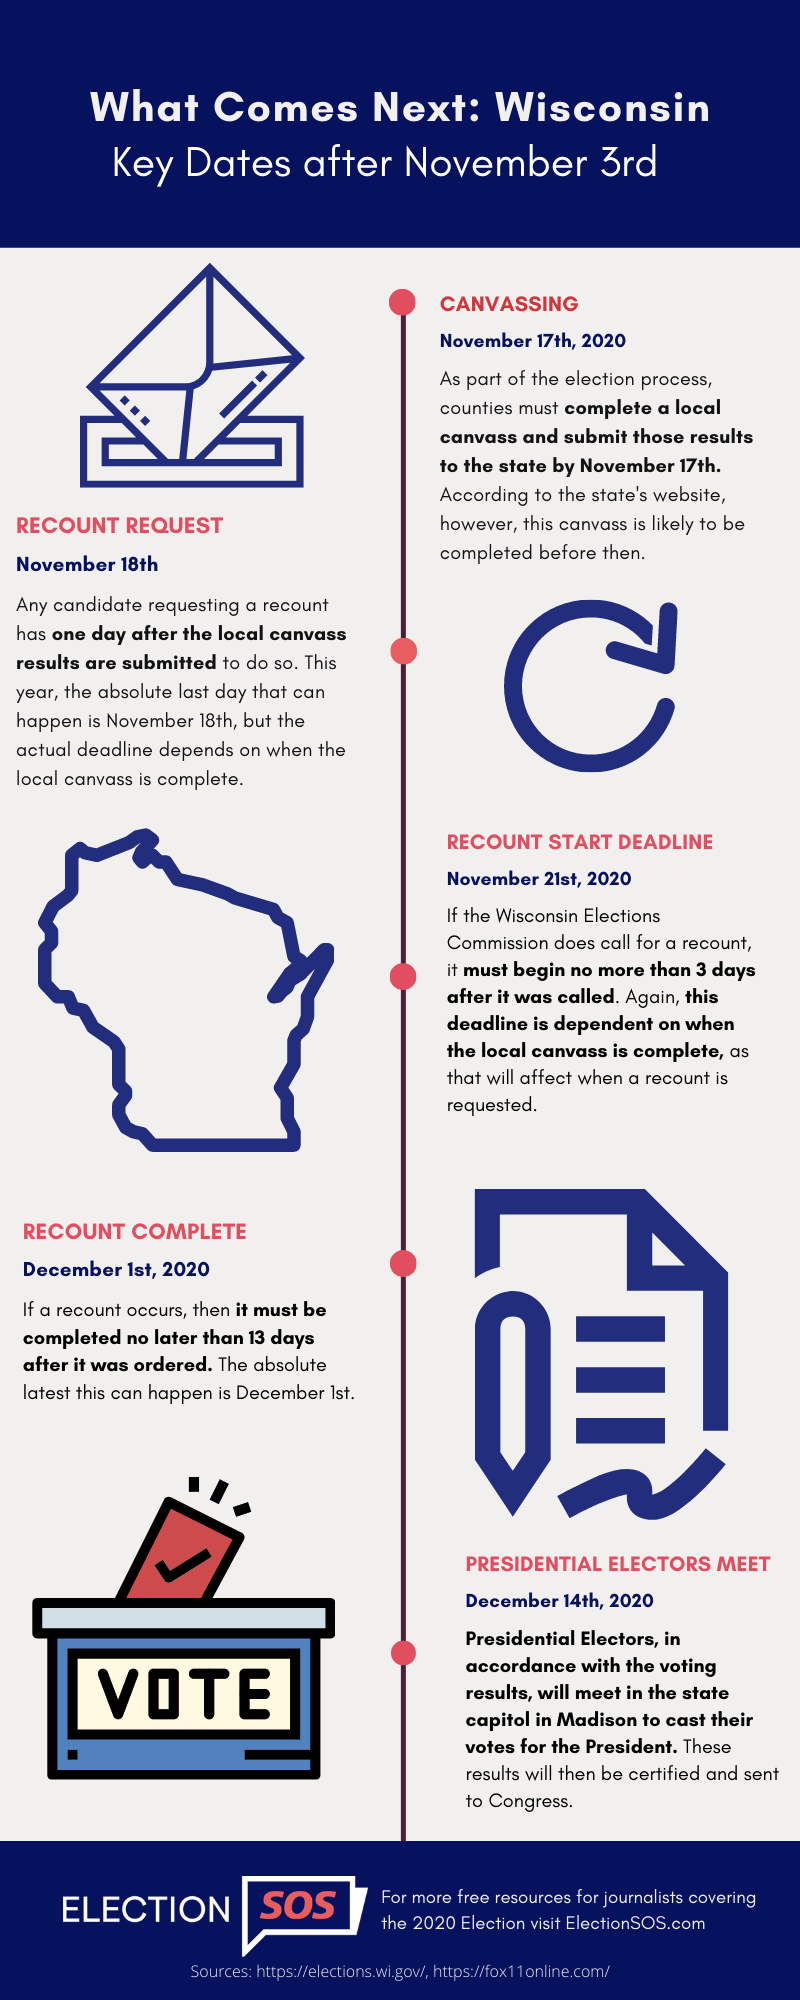 What Comes Next in Wisconsin: Key Election Dates Infographic